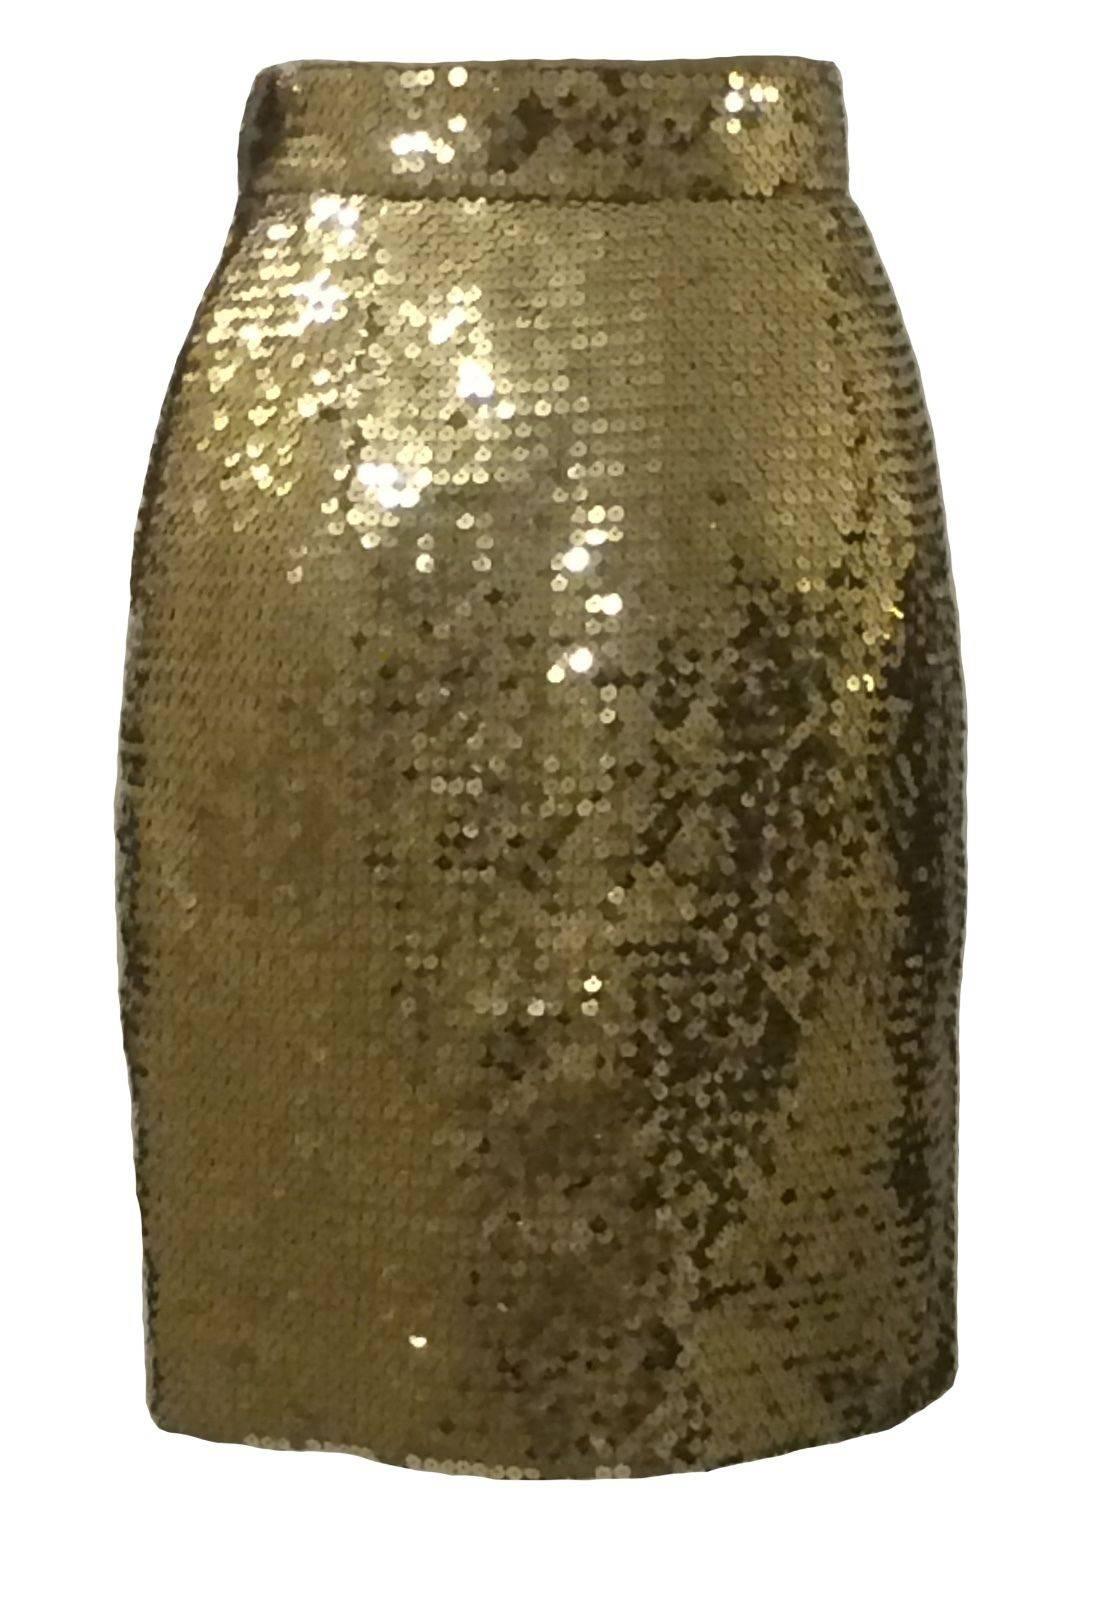 Moschino Couture! vintage early 90's gold sequin pencil skirt.

Side zip and snap with faux button fastener at waist.

100% polyester. Fully lined in 60% acetate, 40% rayon. 

Labelled IT 44, US 10. Runs small. See measurements.
Waist: